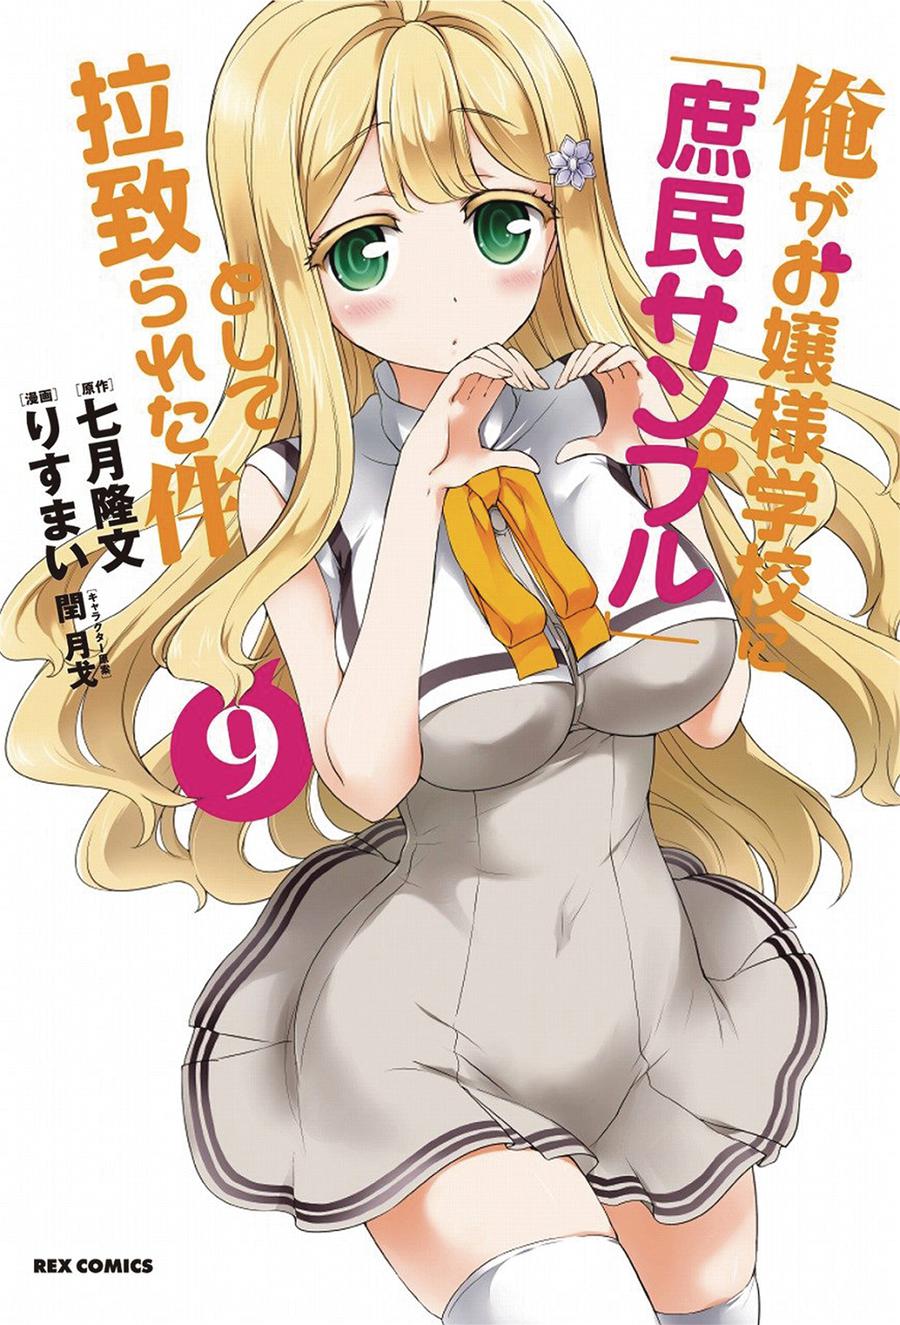 Shomin Sample I Was Abducted By An Elite All-Girls School As A Sample Commoner Vol 9 GN